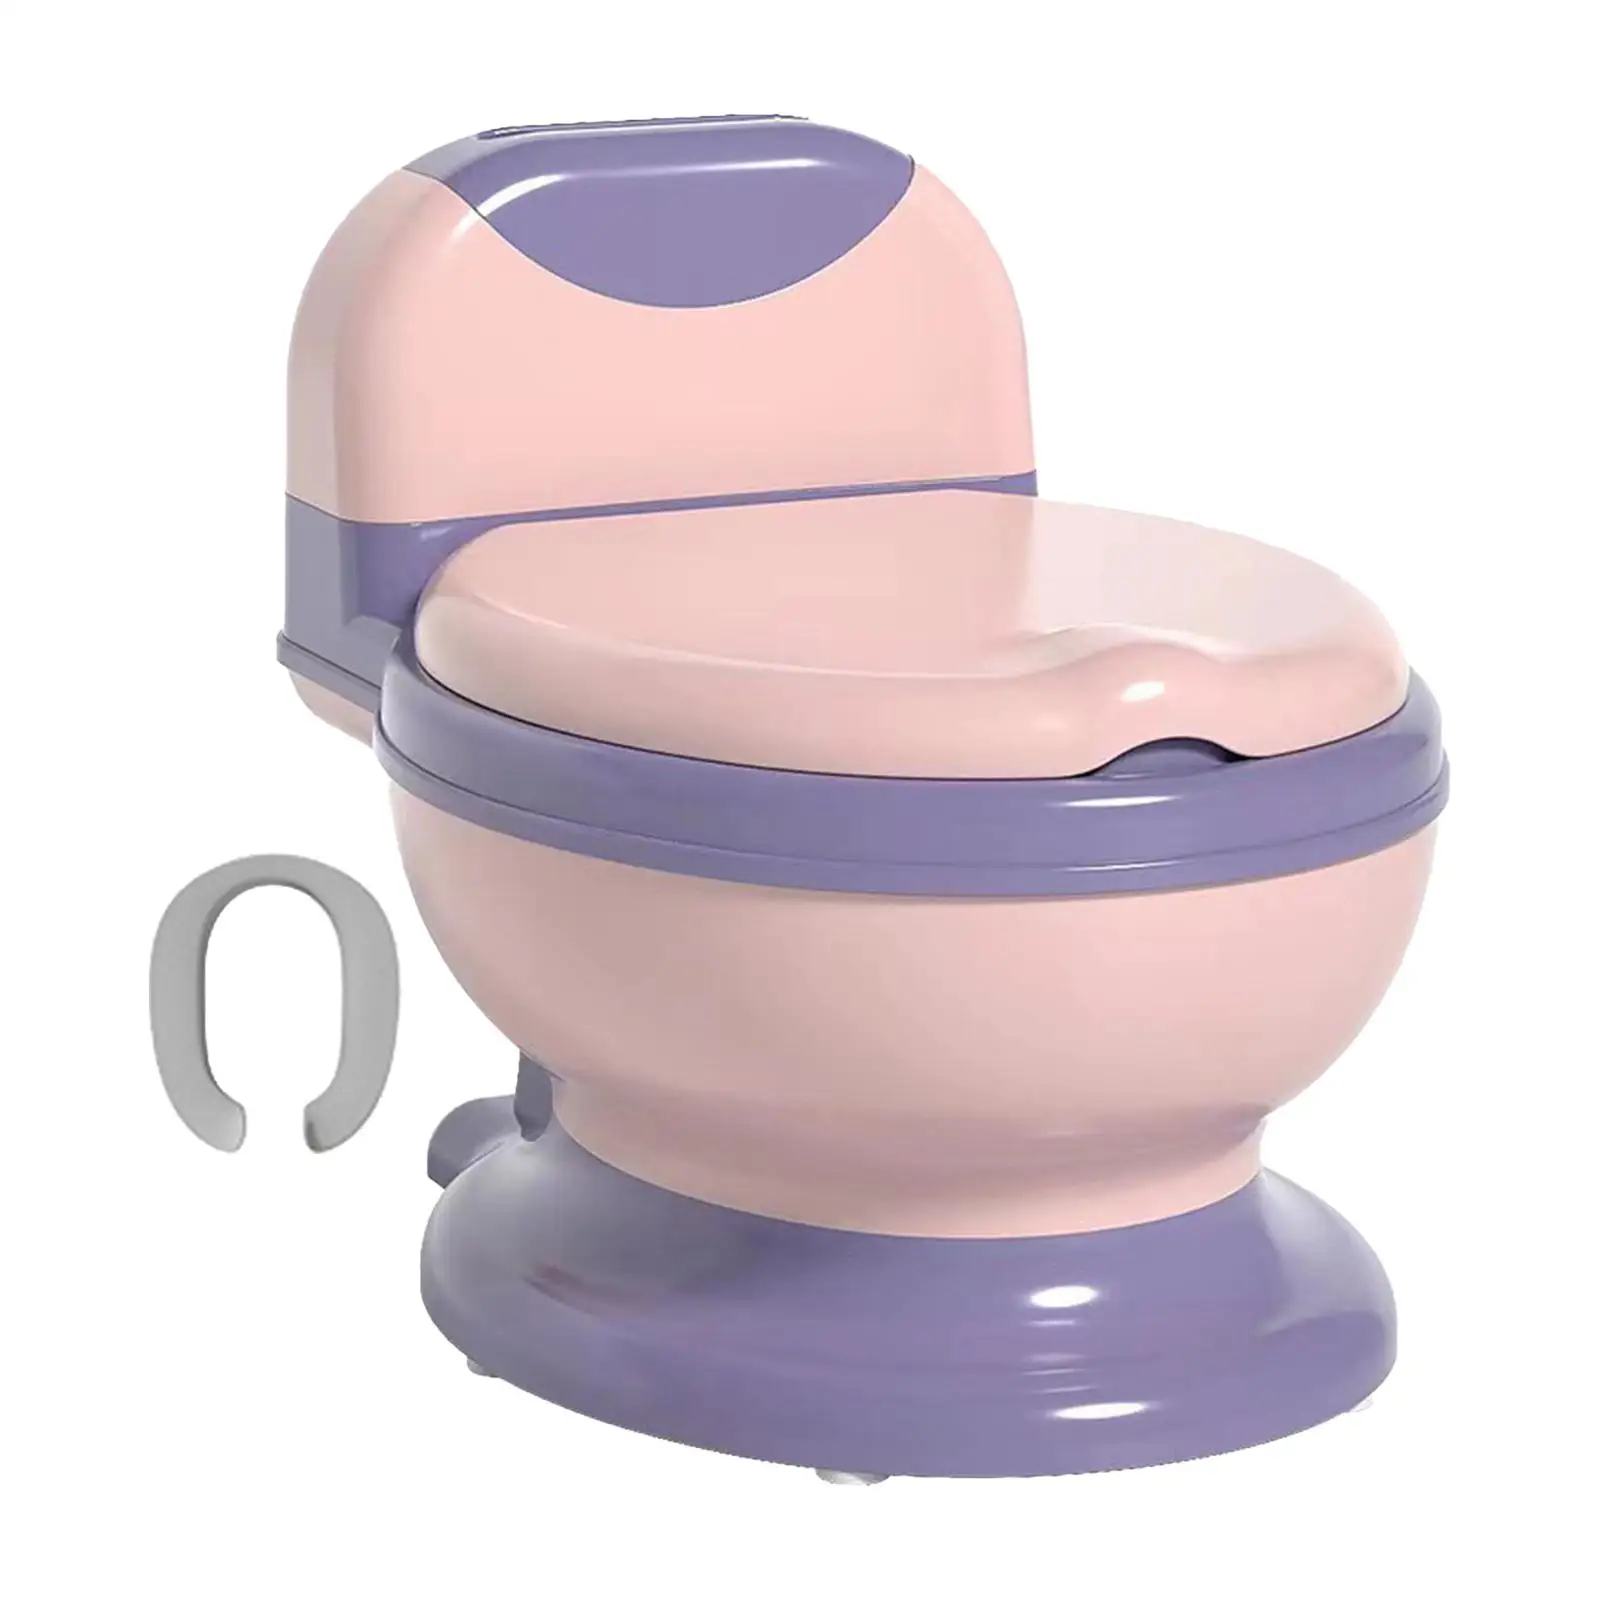 Potty Train Toilet Realistic Toilet Toddlers Potty Chair Real Feel Potty for Toddlers